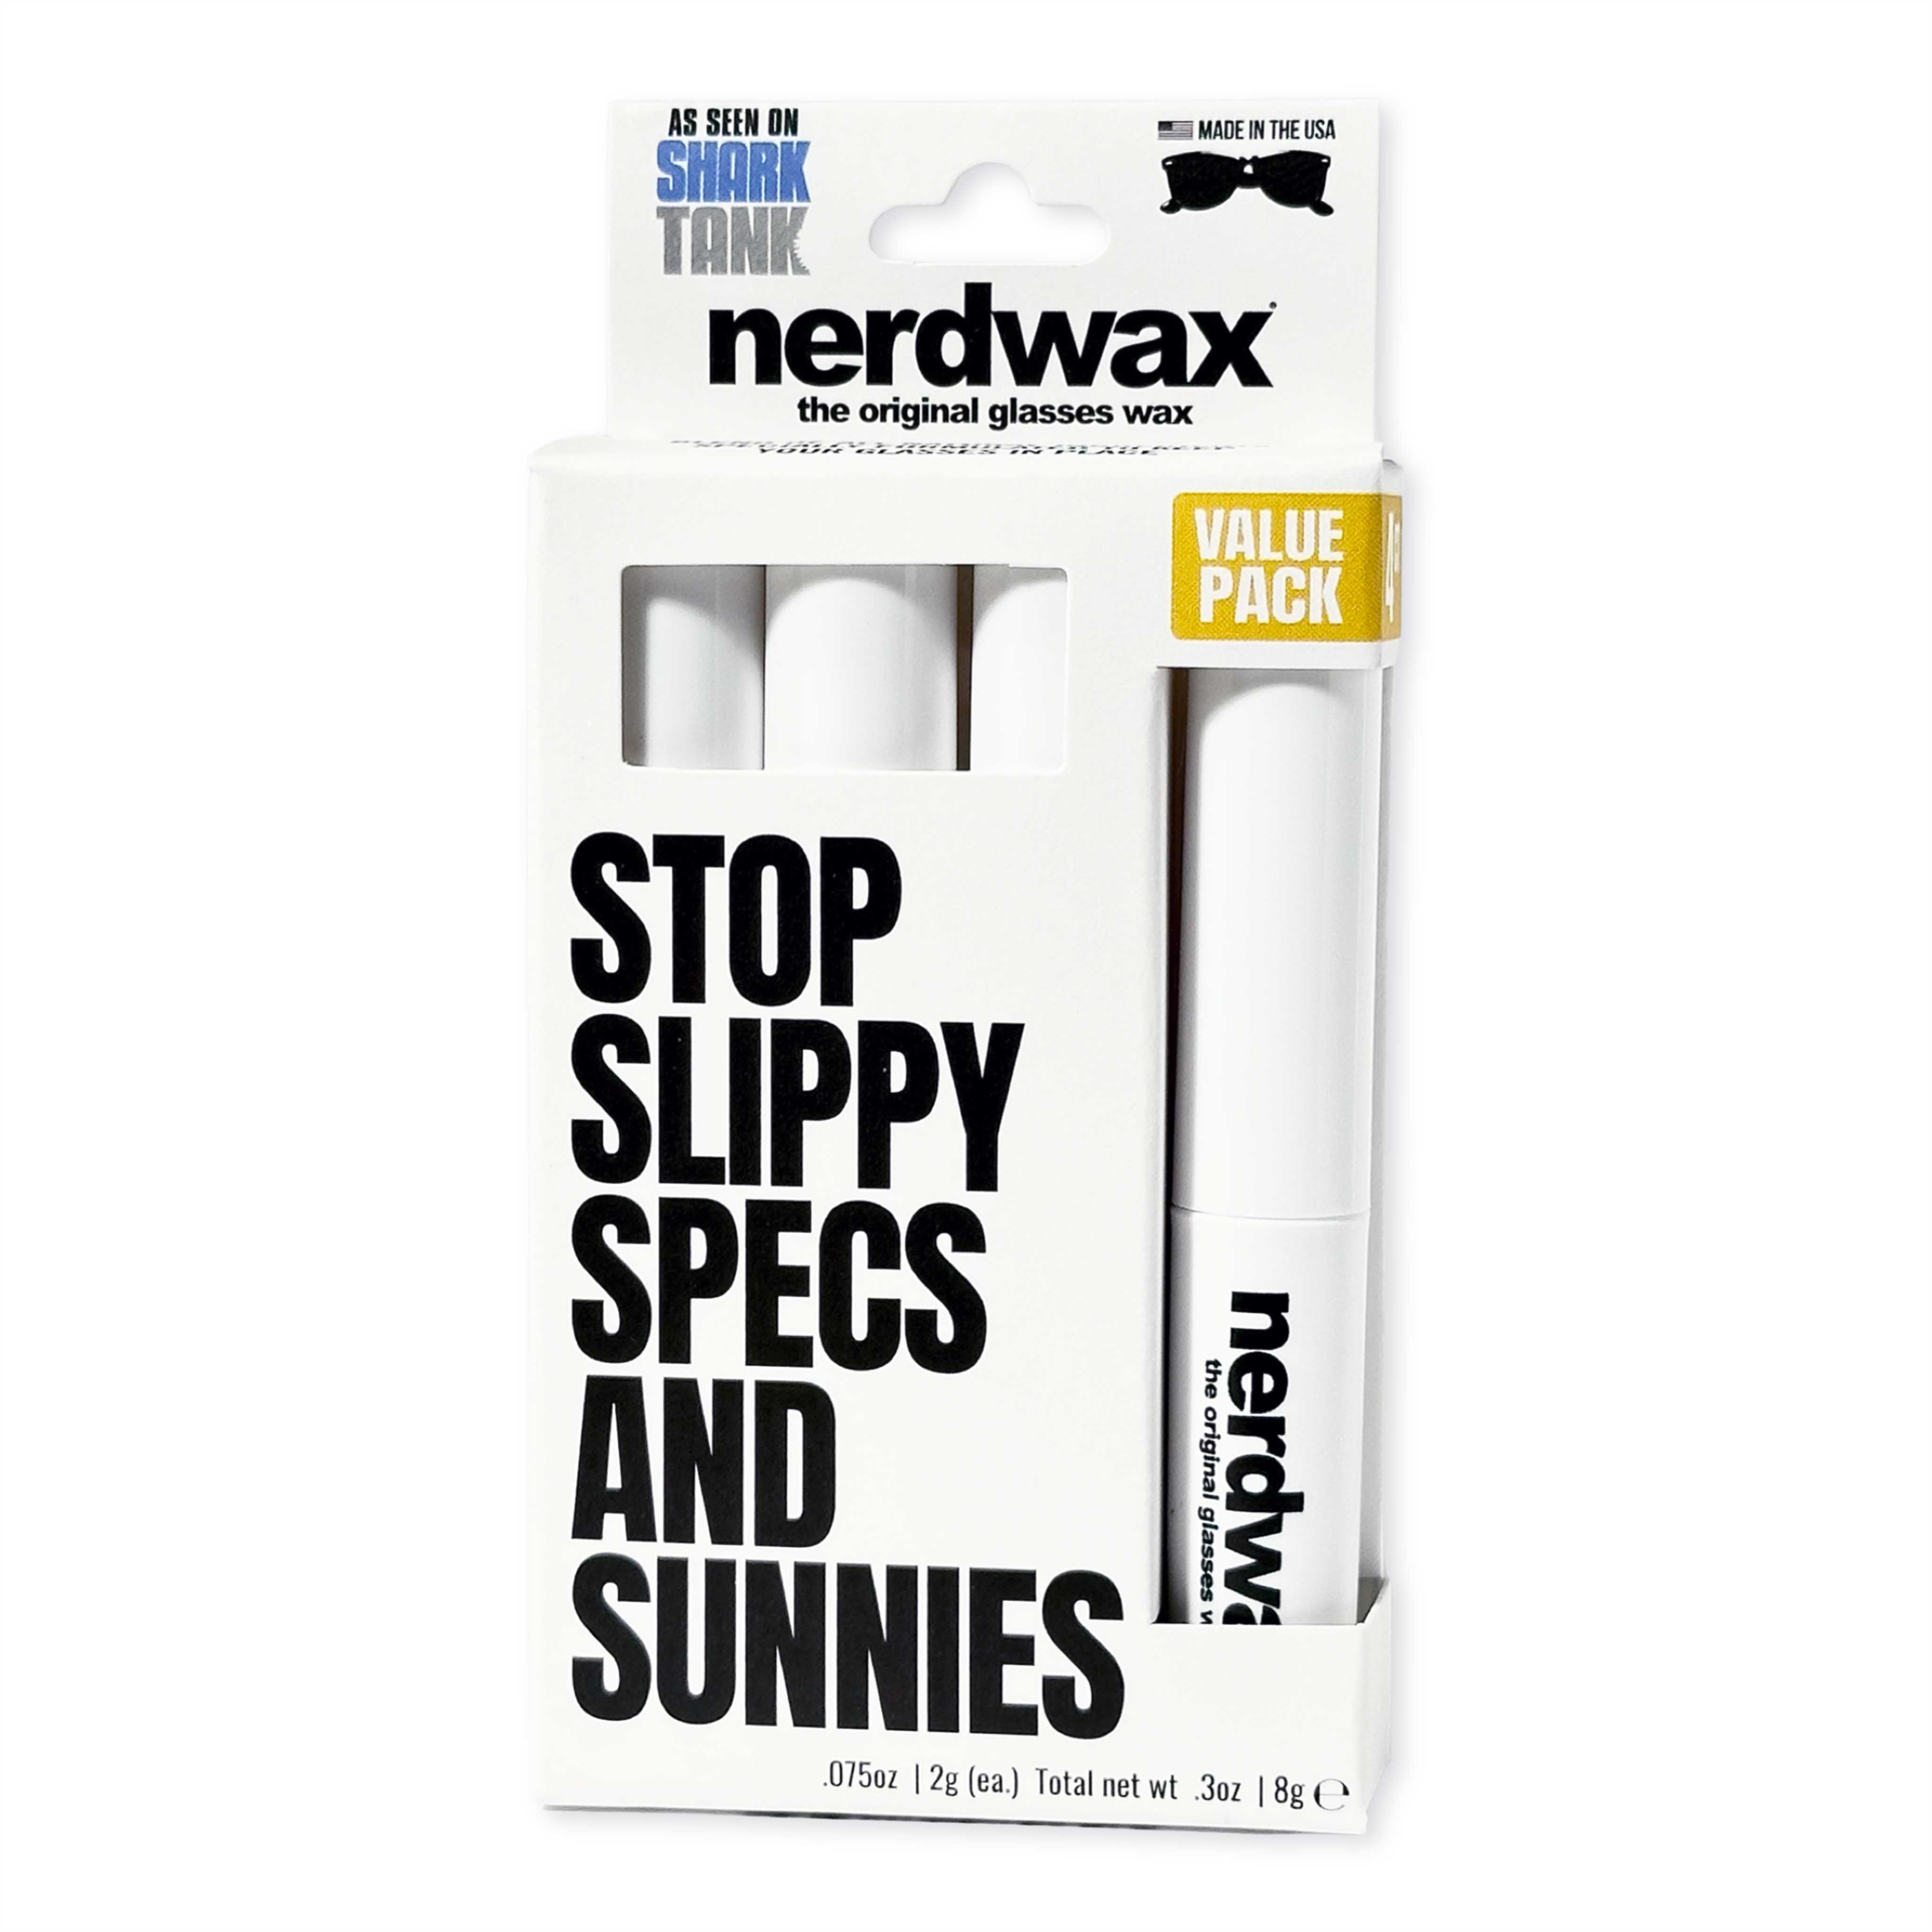 Nerdwax Stops Your Glasses From Slippin' Down Your Face!